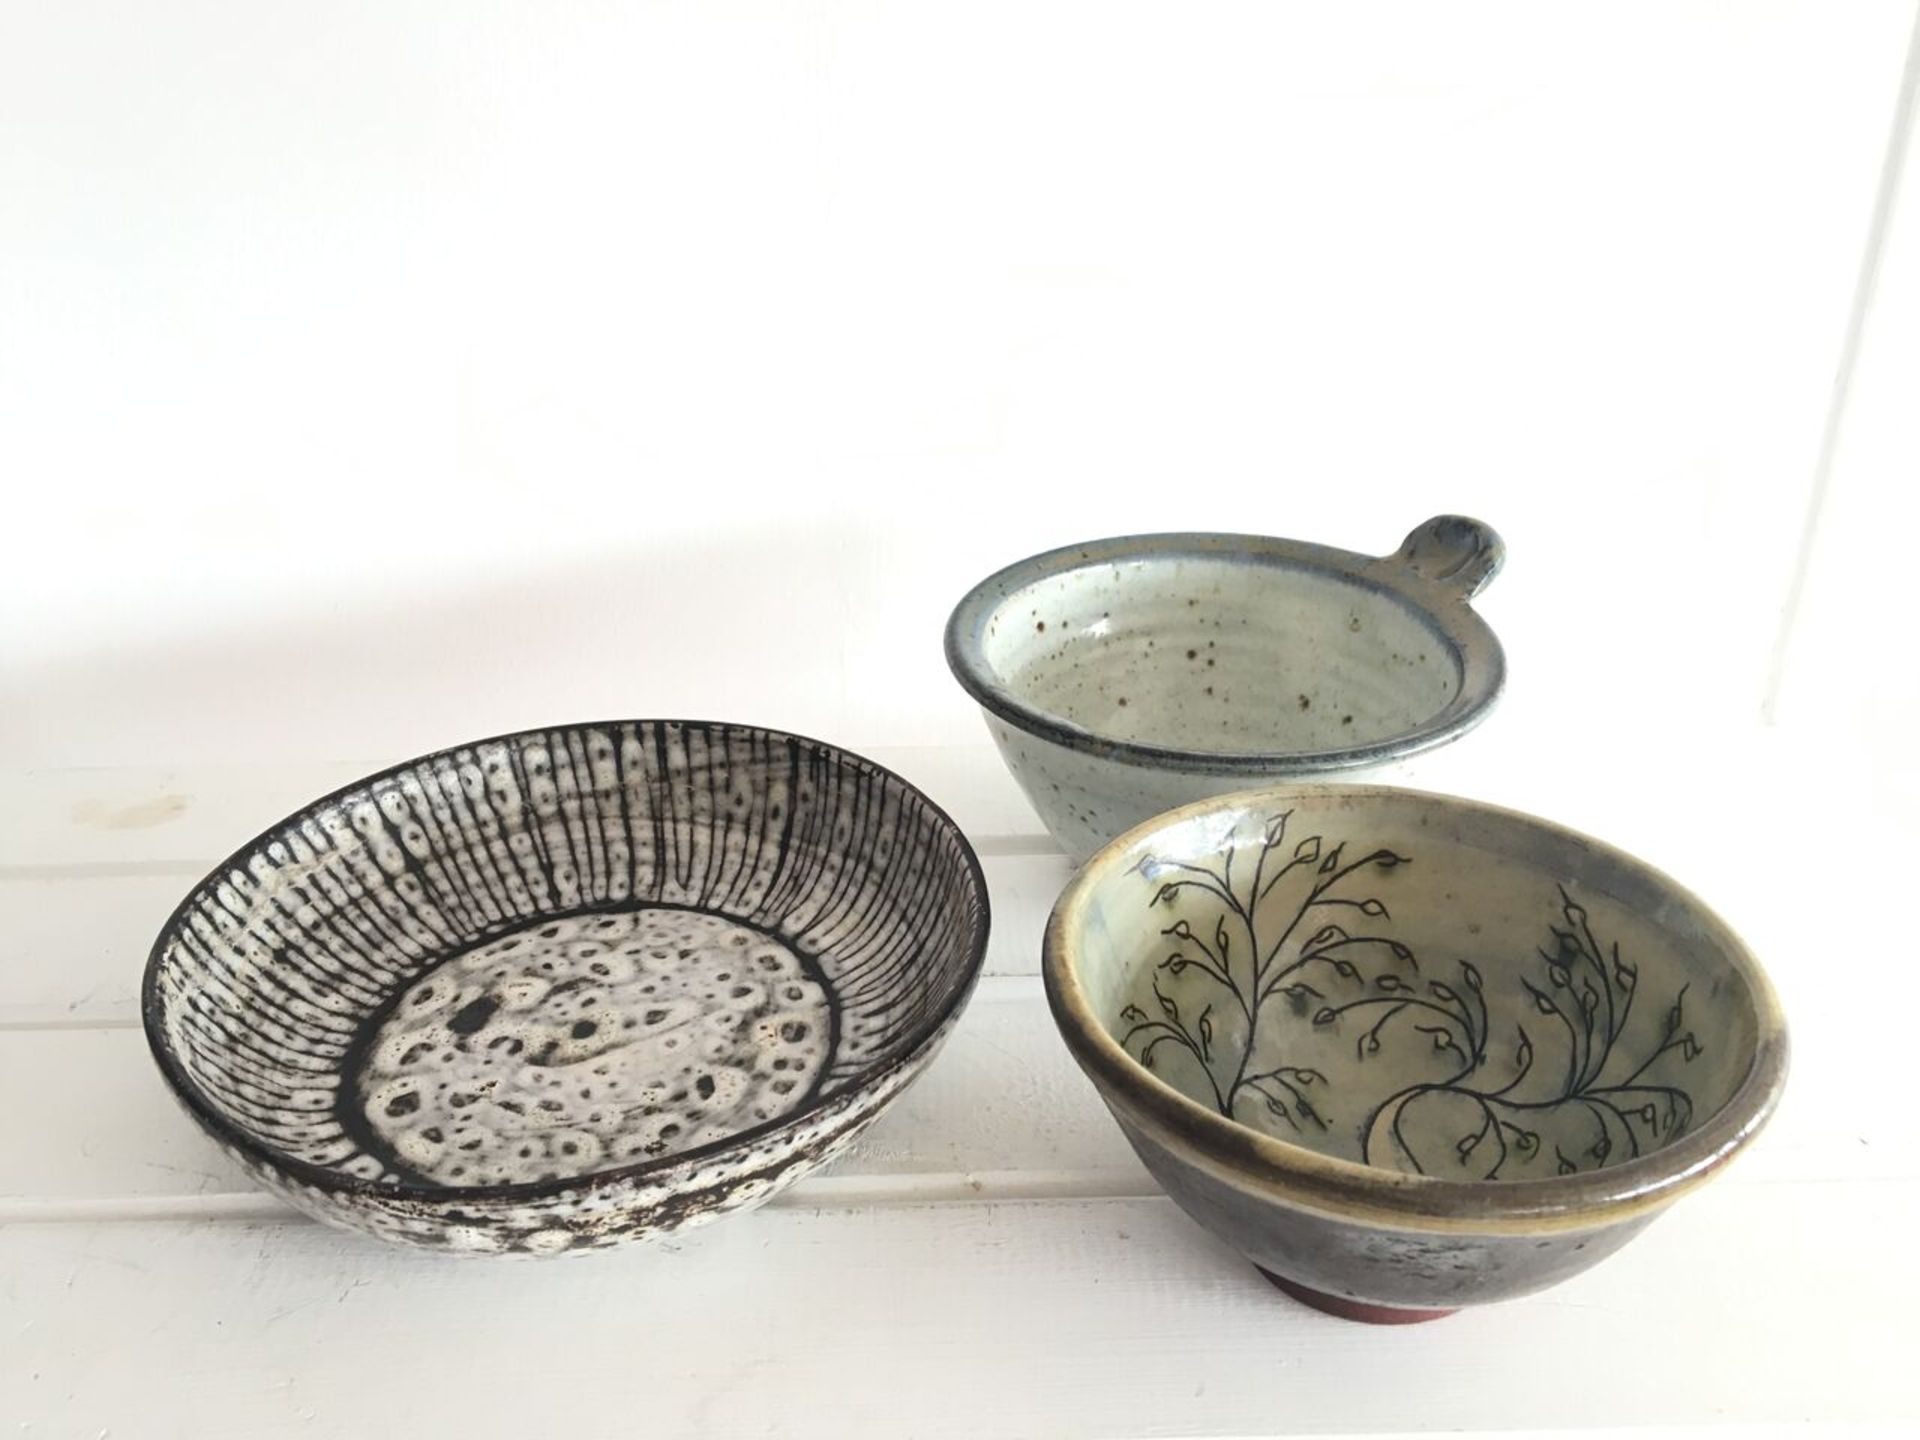 GROUP OF THREE UNSIGNED STUDIO ART POTTERY BOWLS. ALL WITH NO OBVIOUS DAMAGE. FREE UK DELIVERY. NO